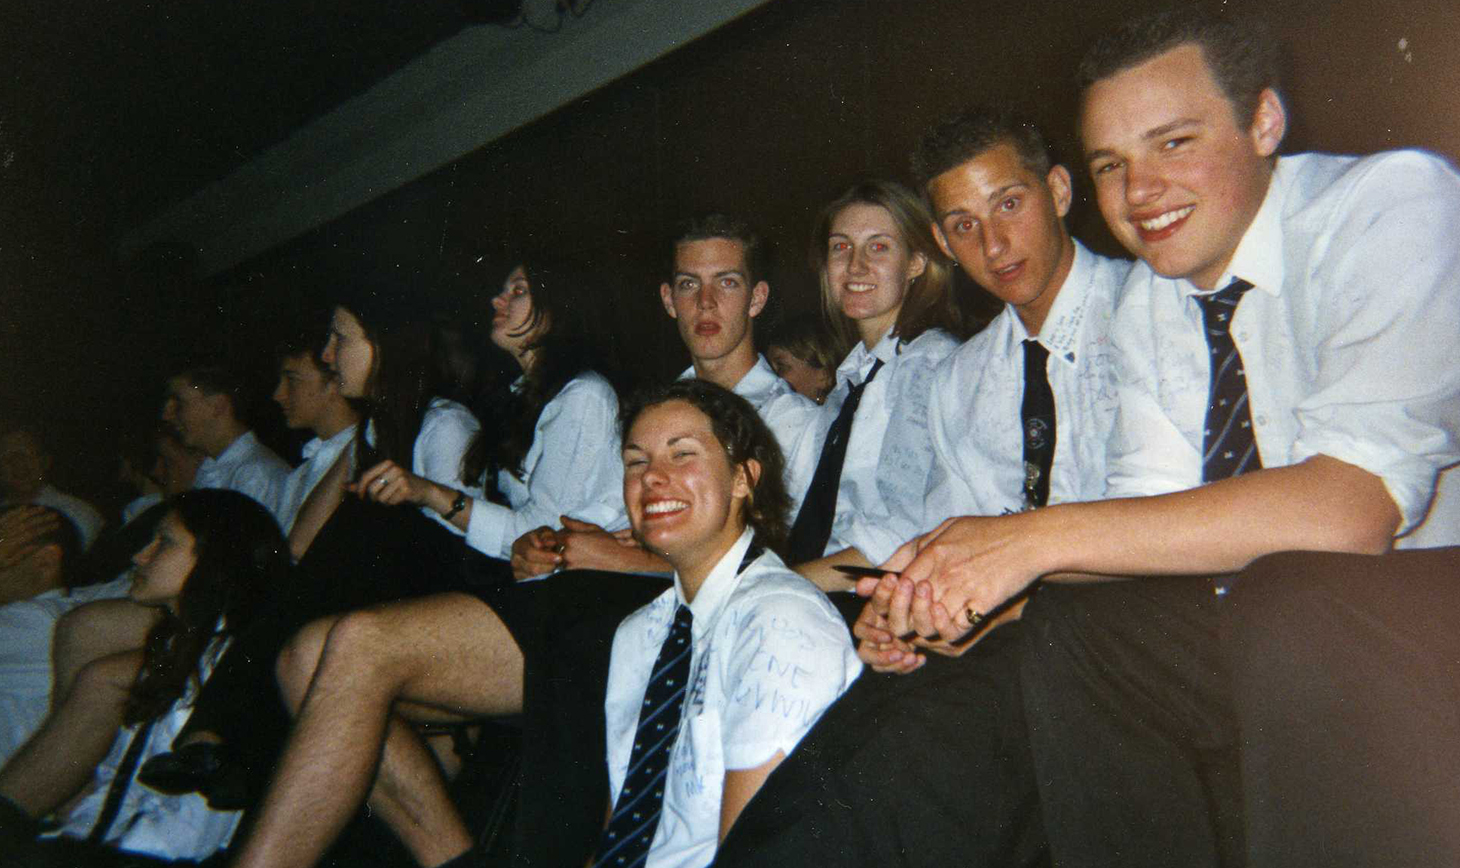 Some fresh faces from the 2001 Leavers Assembly